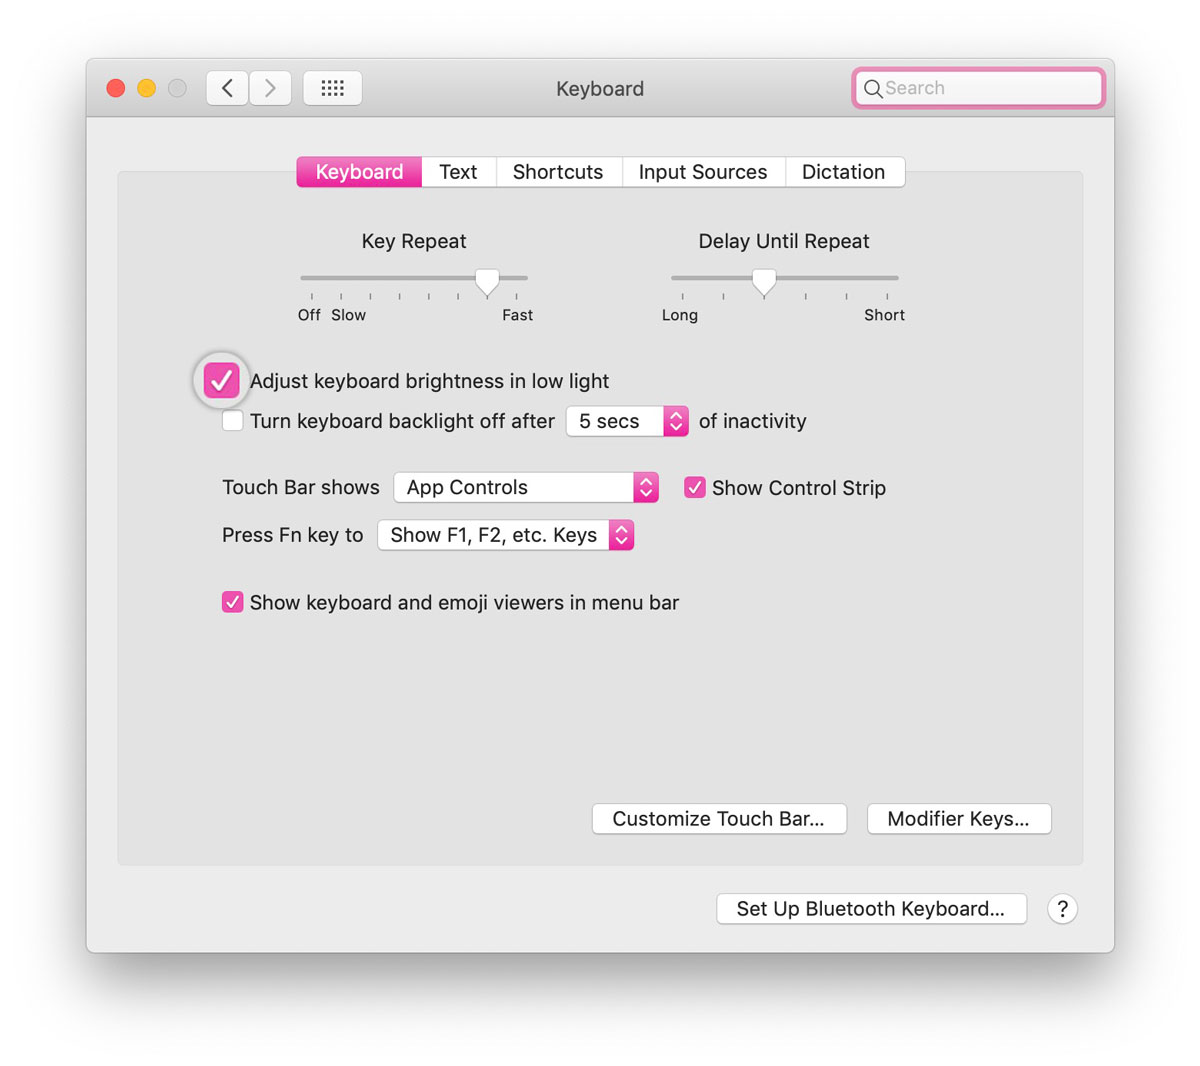 eksegese Forbipasserende Ristede How to Disable Auto-Brightness on Your Mac